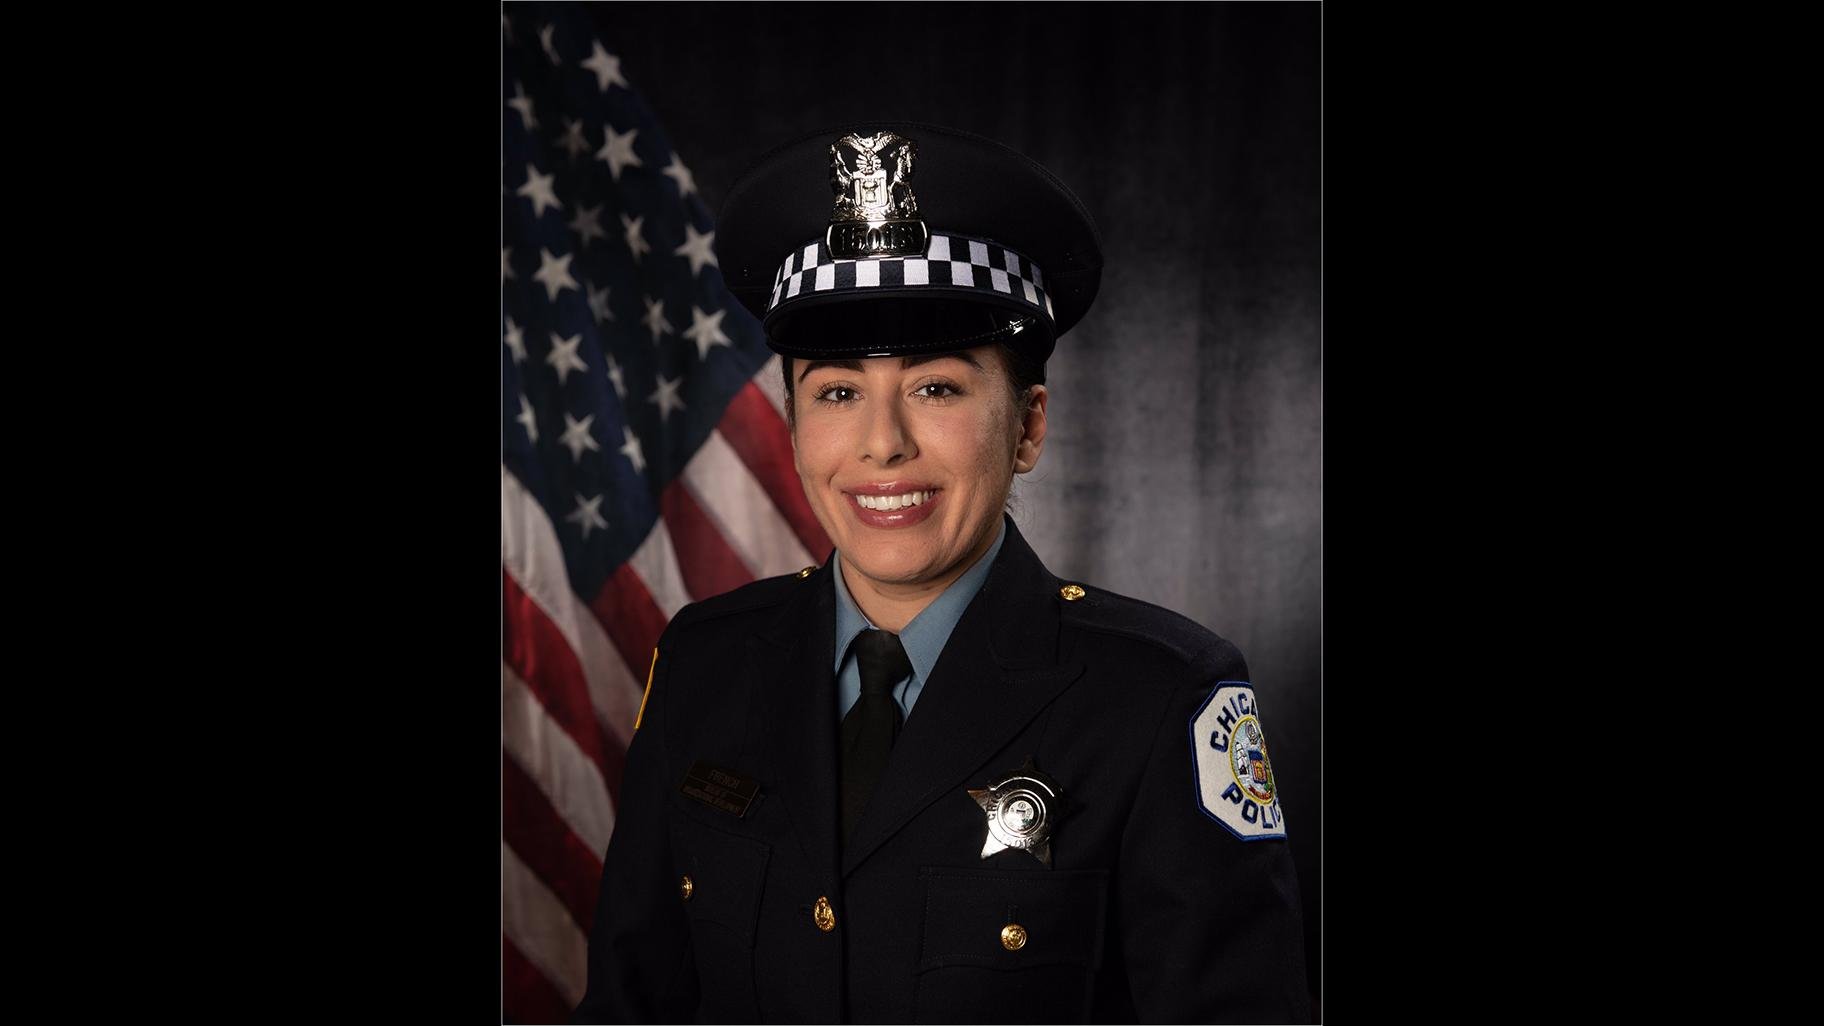 Chicago police Officer Ella French (@TomAhernCPD / Twitter)